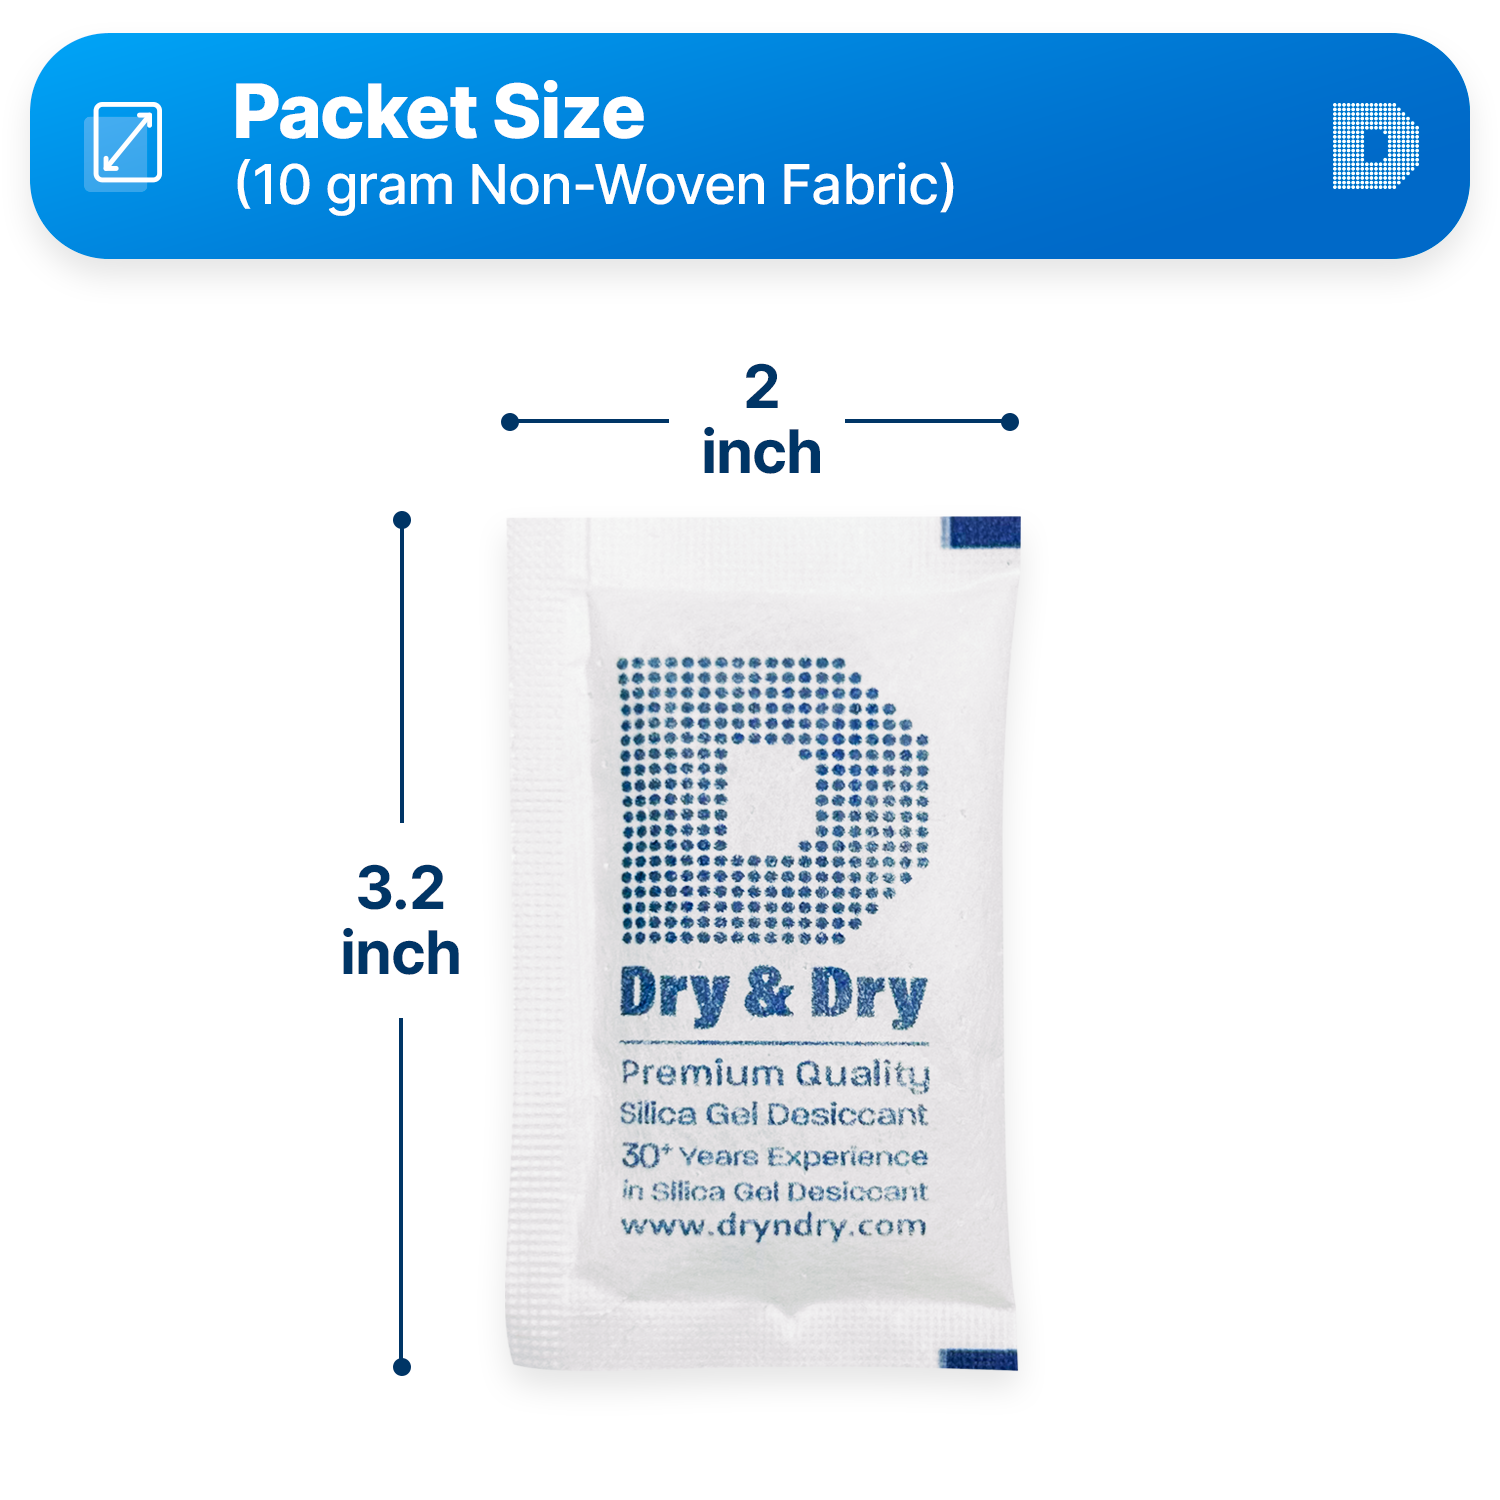 10 Gram [1700 Packets] "Dry & Dry" Premium Silica Gel Desiccant Packets - Rechargeable Non-Woven Fabric (Cloth)